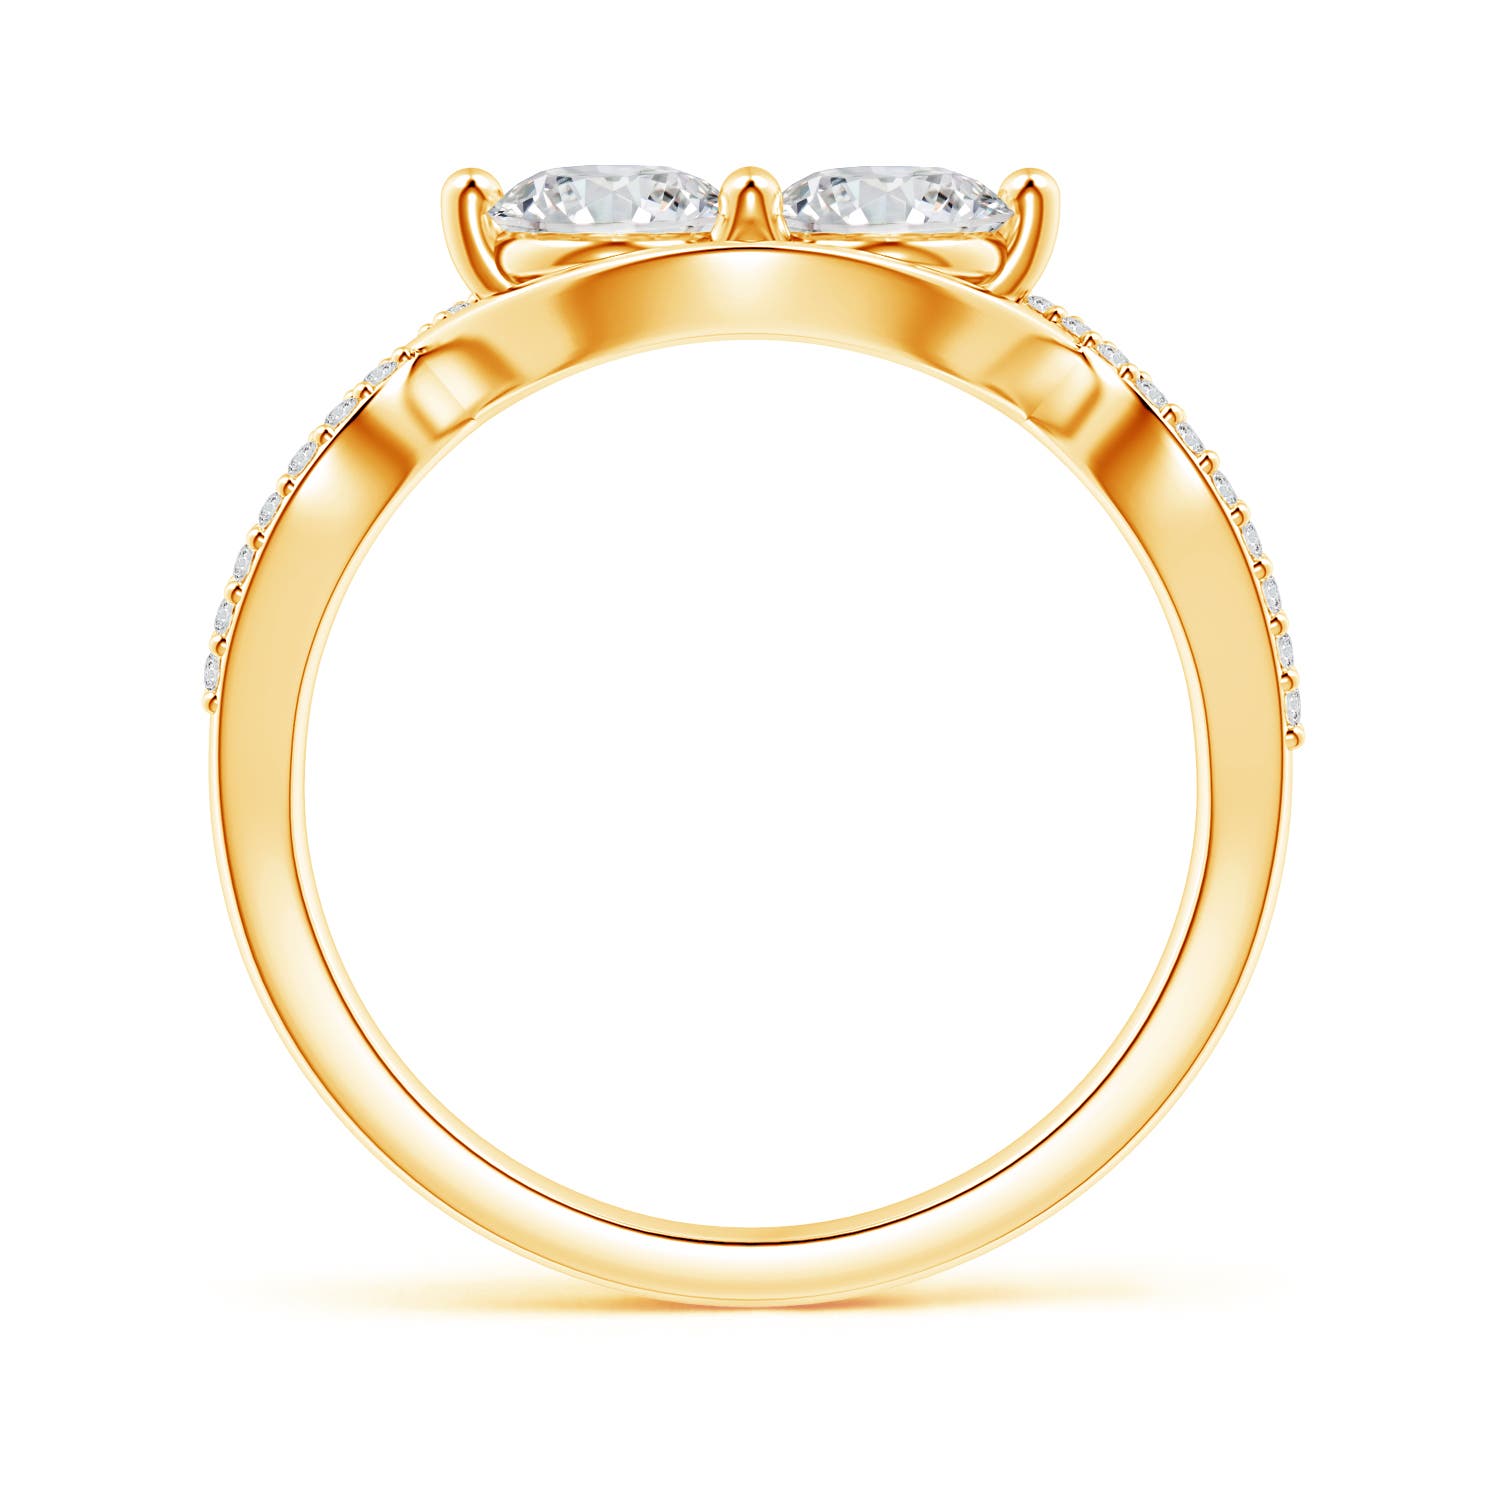 H, SI2 / 1.09 CT / 14 KT Yellow Gold